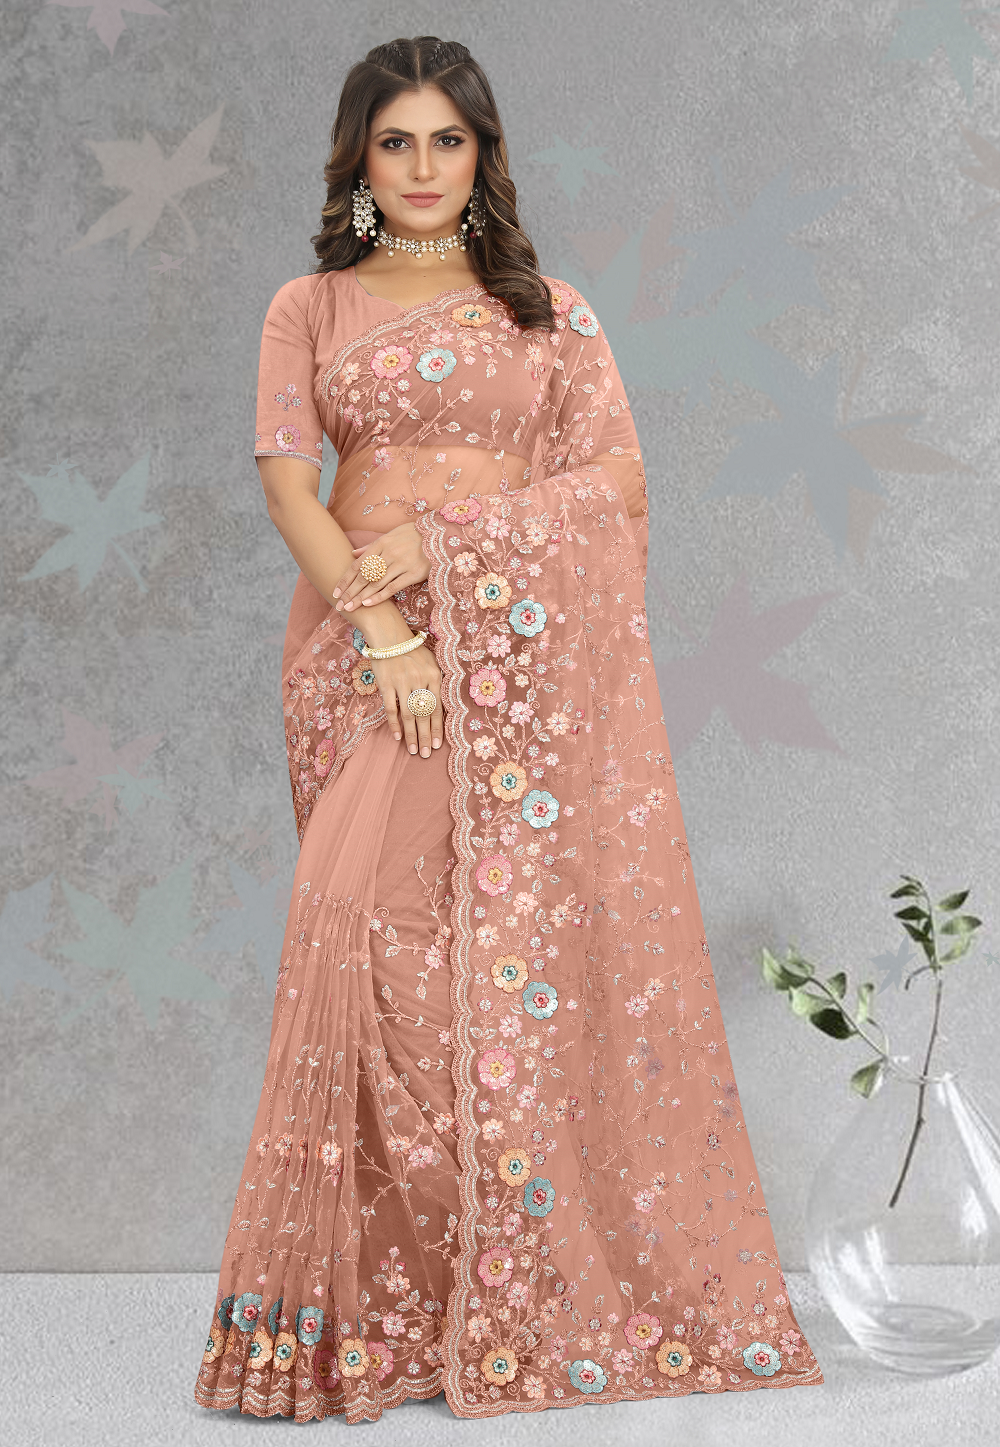 Net Embroidered Saree in Peach